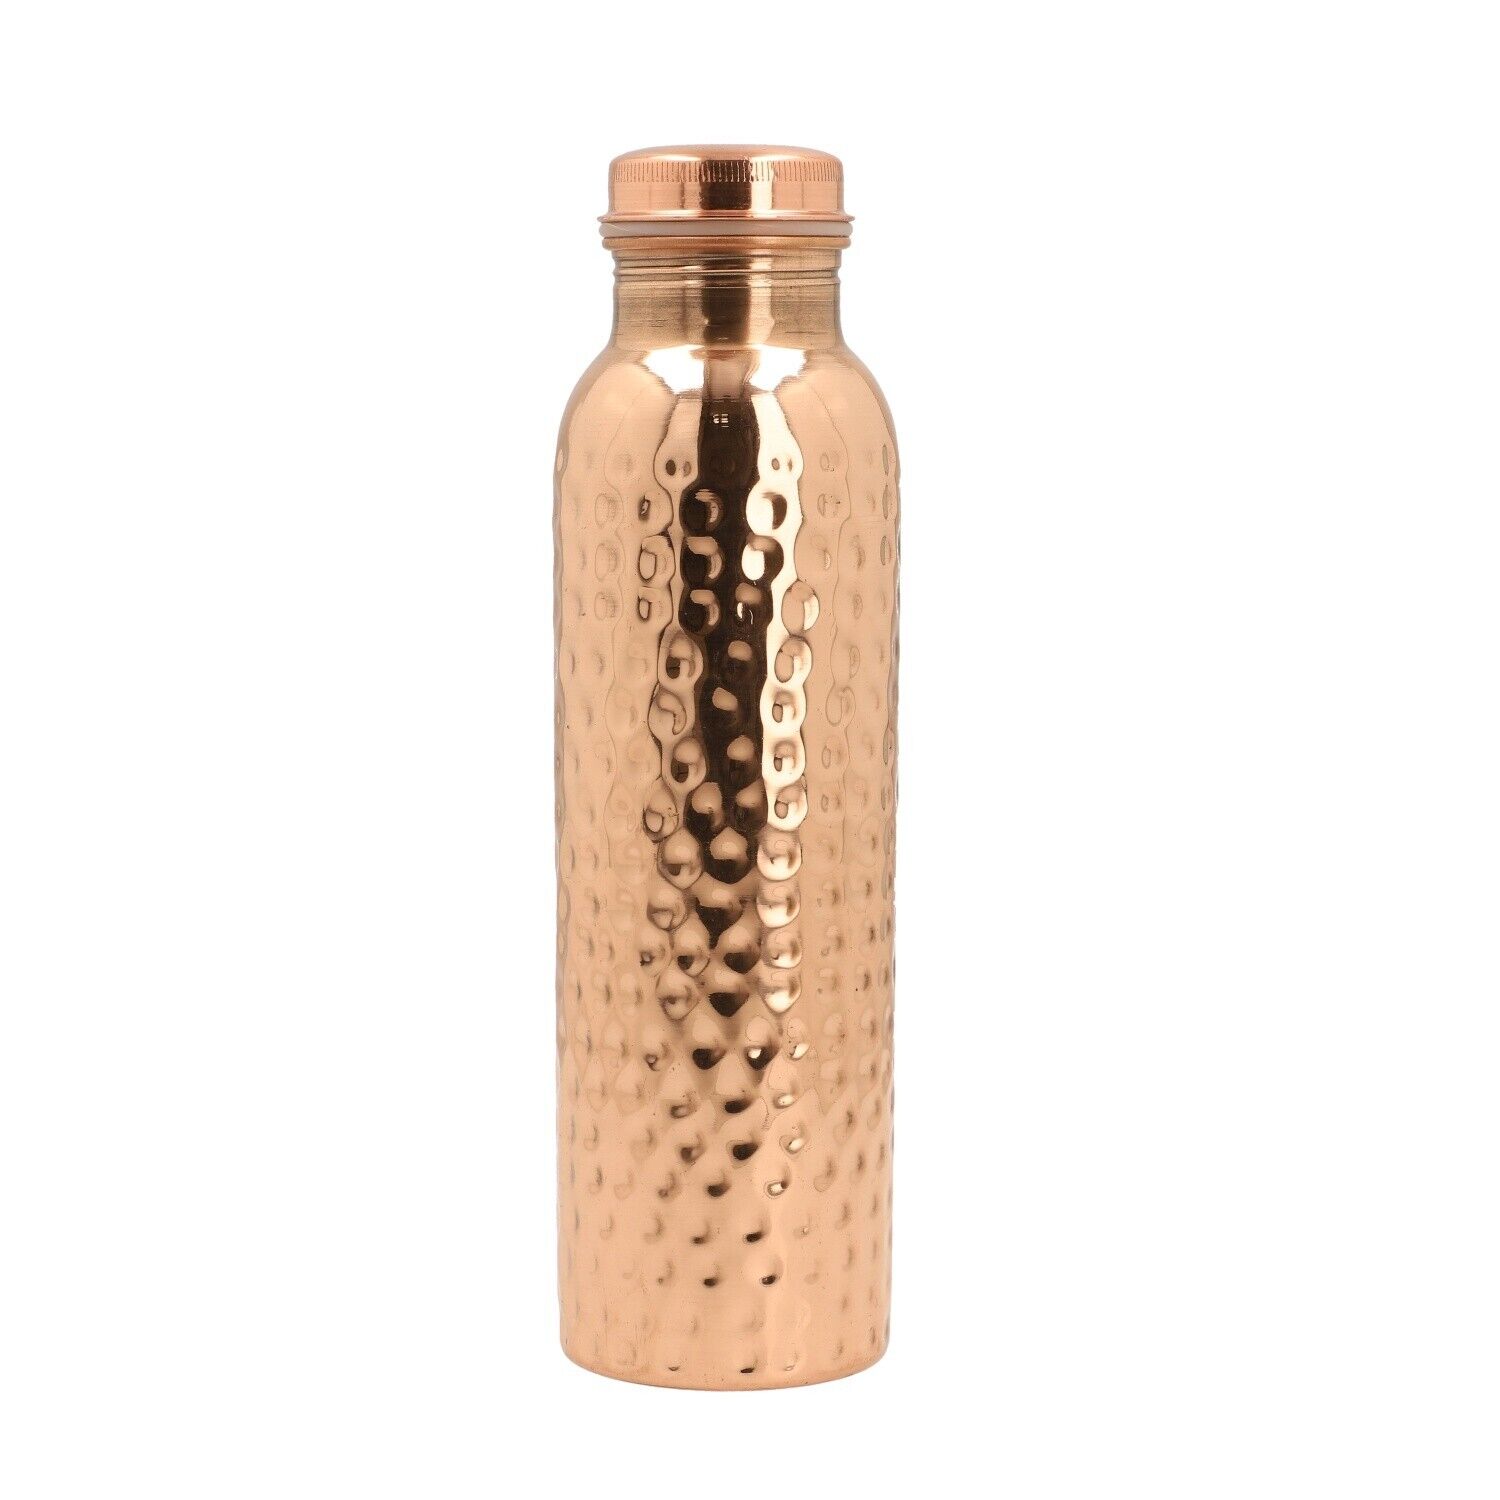 *SHIPS FROM USA* Pure Copper Water Bottle Handmade-Hammered Finish Ayurvedic